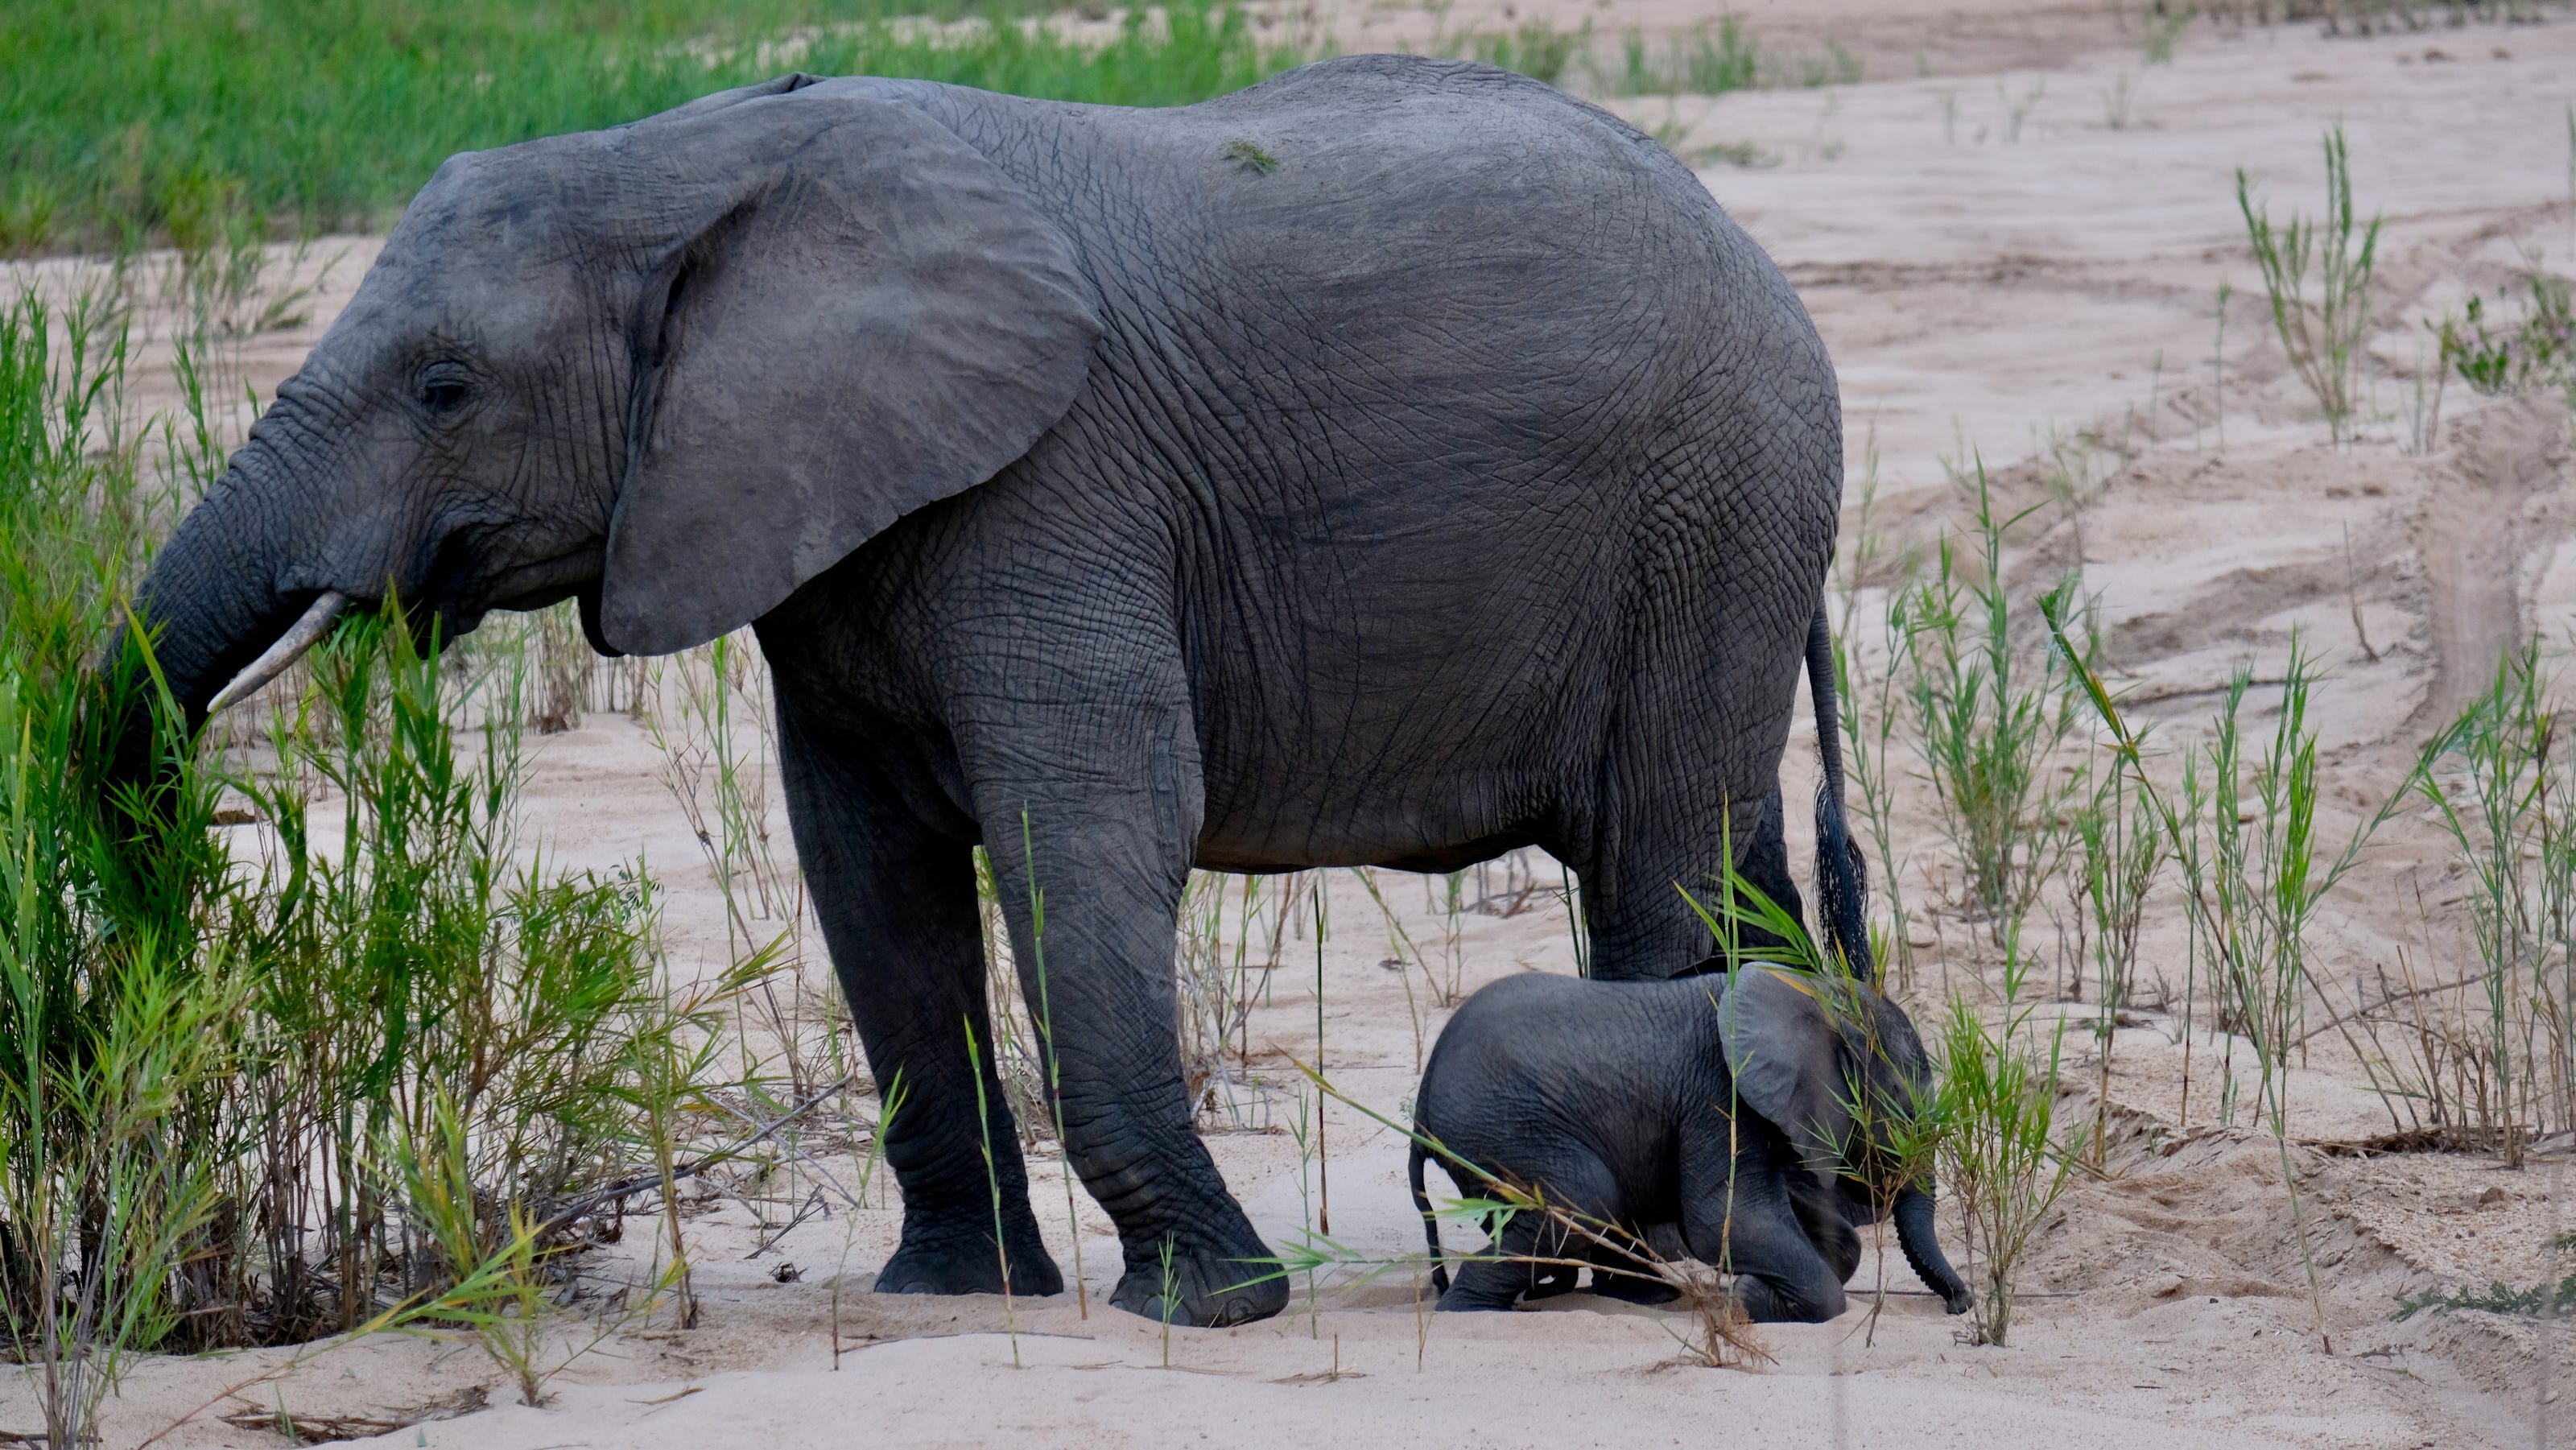 Elephants trample suspected poacher in South African park; 2nd missing